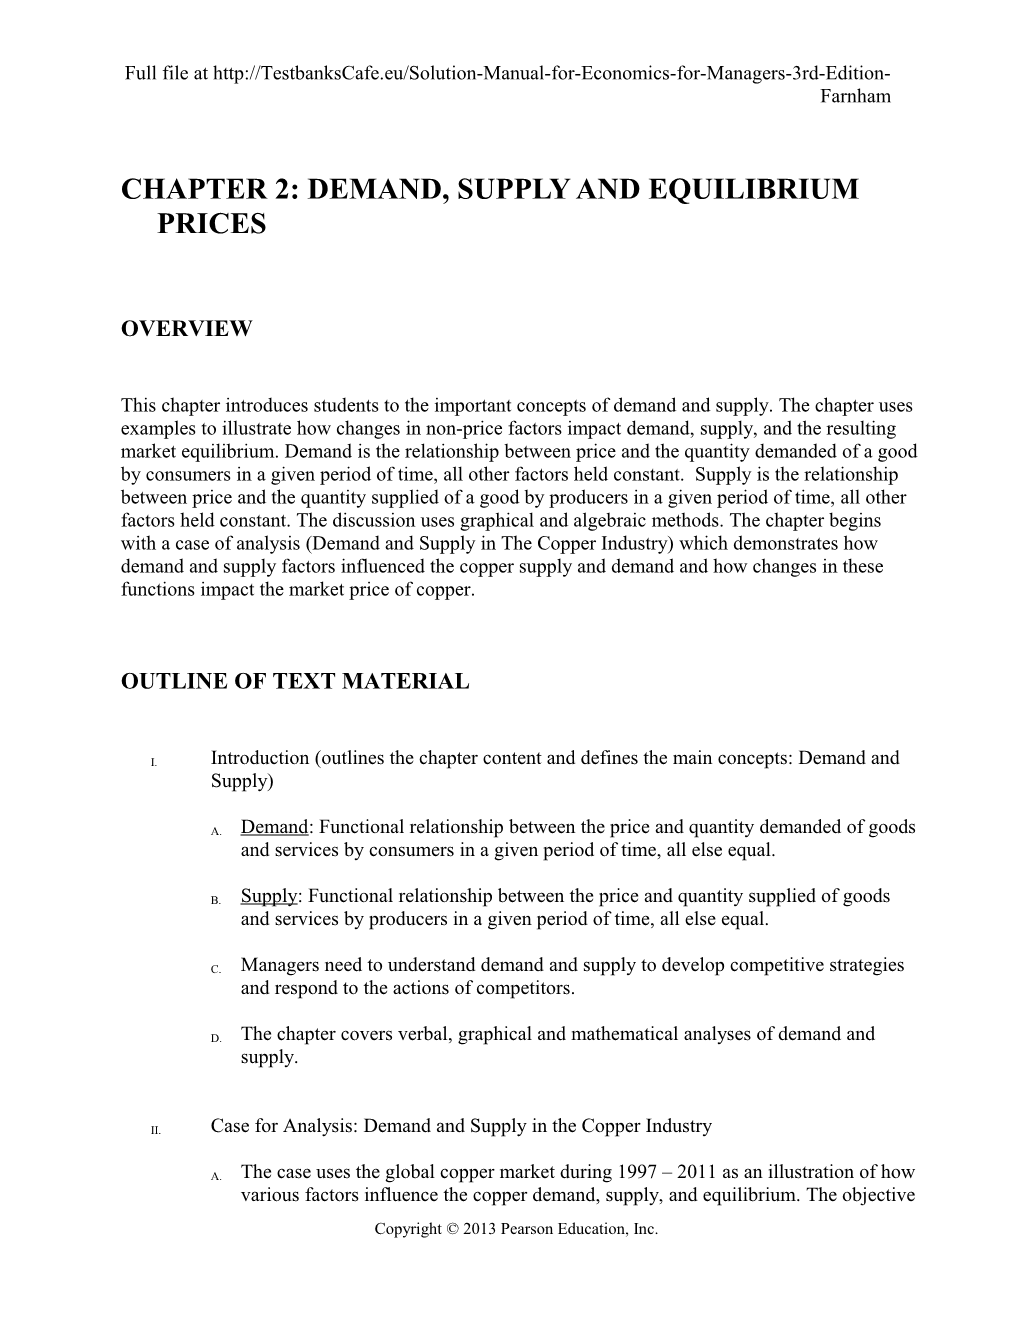 Chapter 2: Demand, Supply and Equilibrium Prices